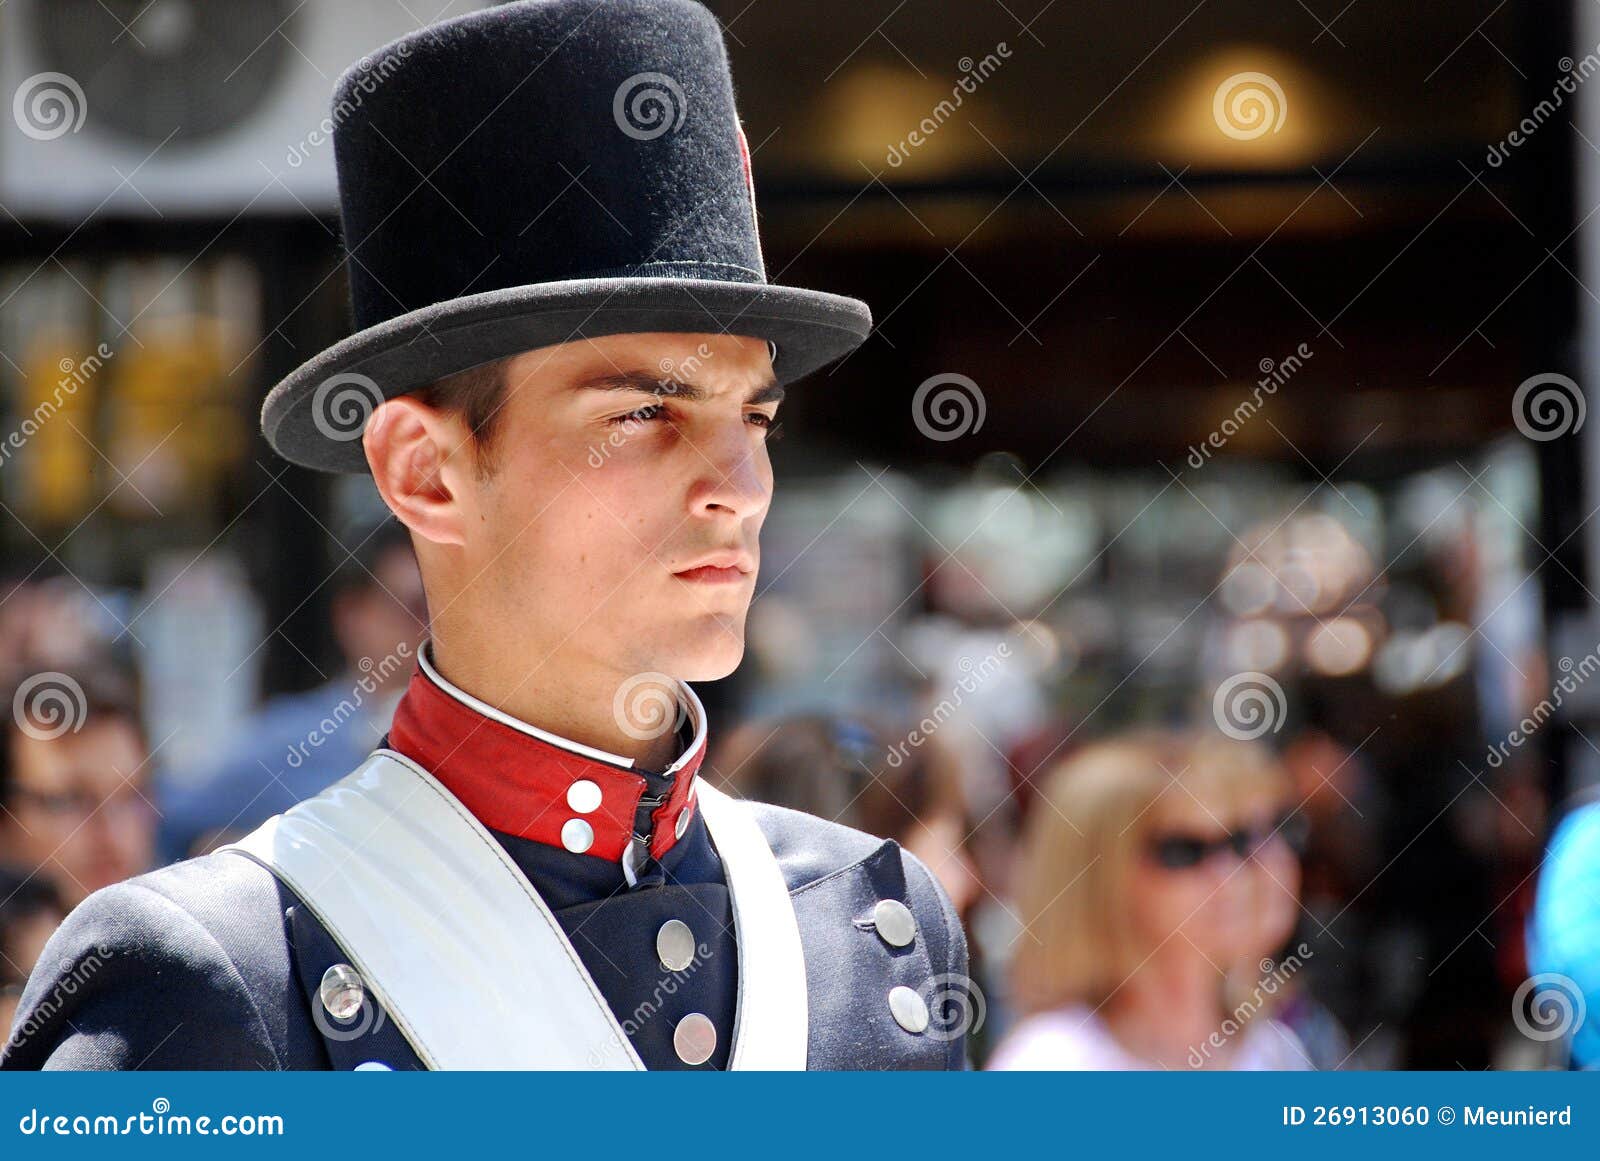 Man in Soldier Costume Parade Editorial Image - Image of military ...